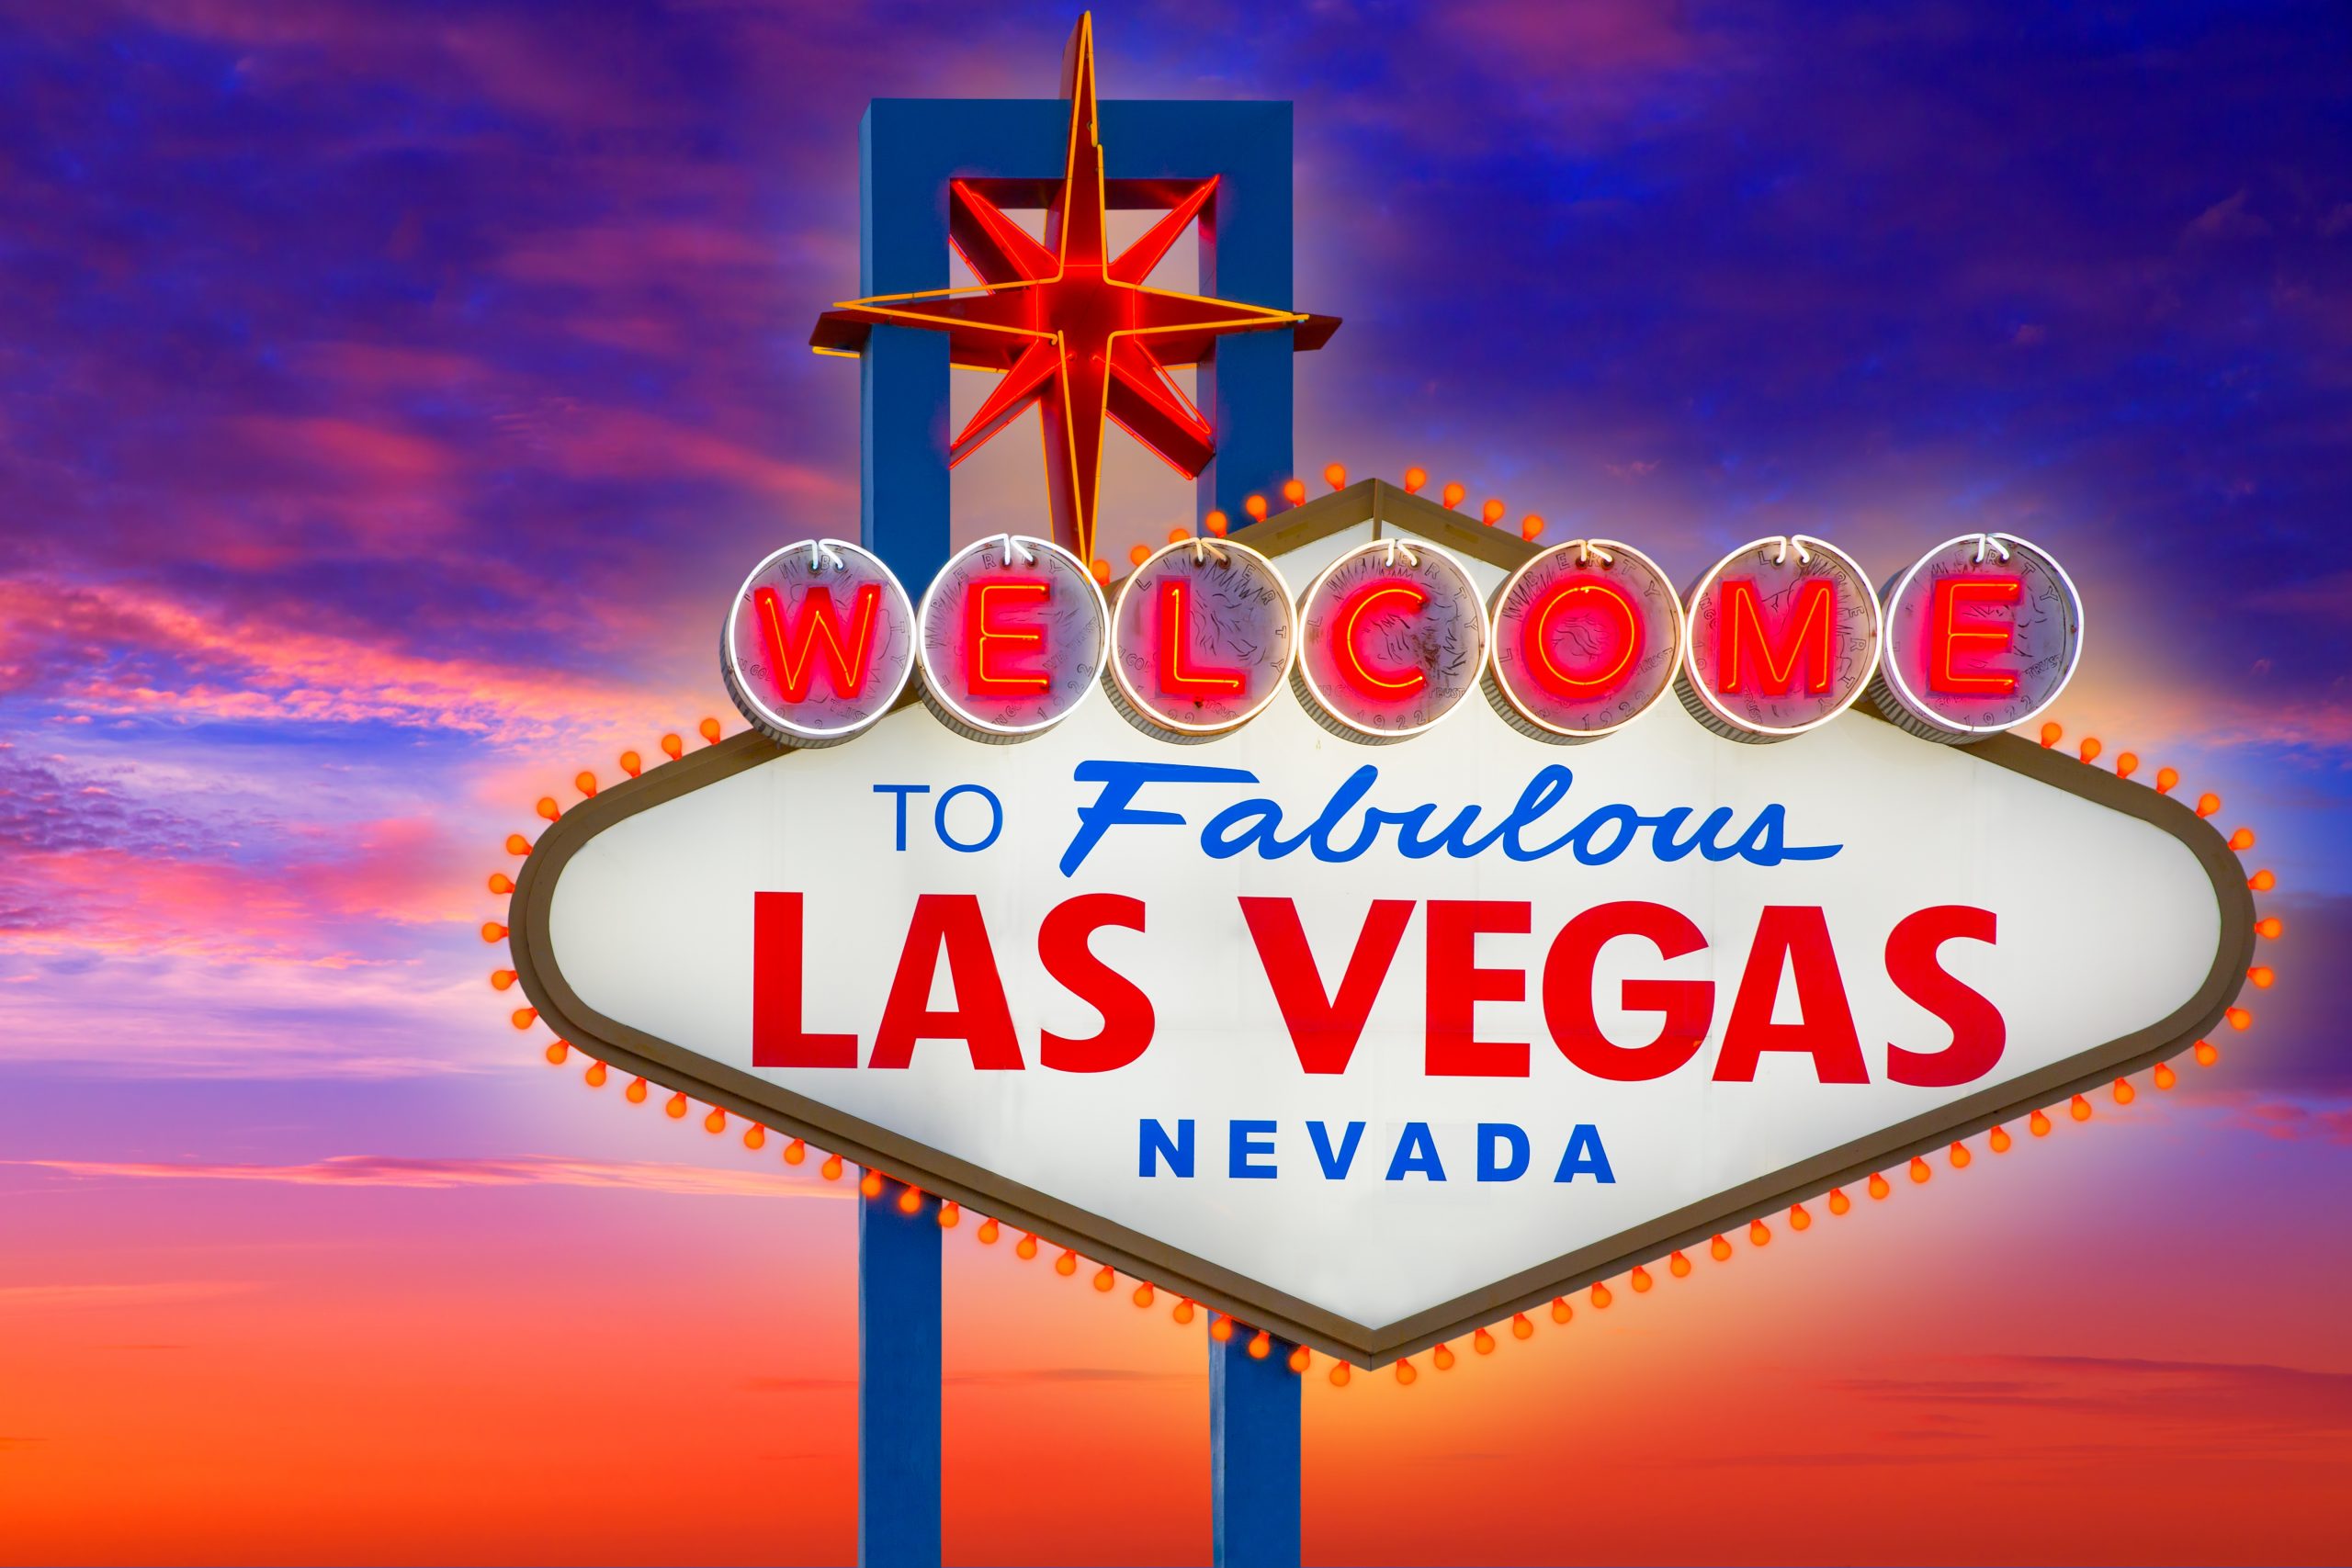 Welcome to Fabulous Las Vegas sign sunset sky